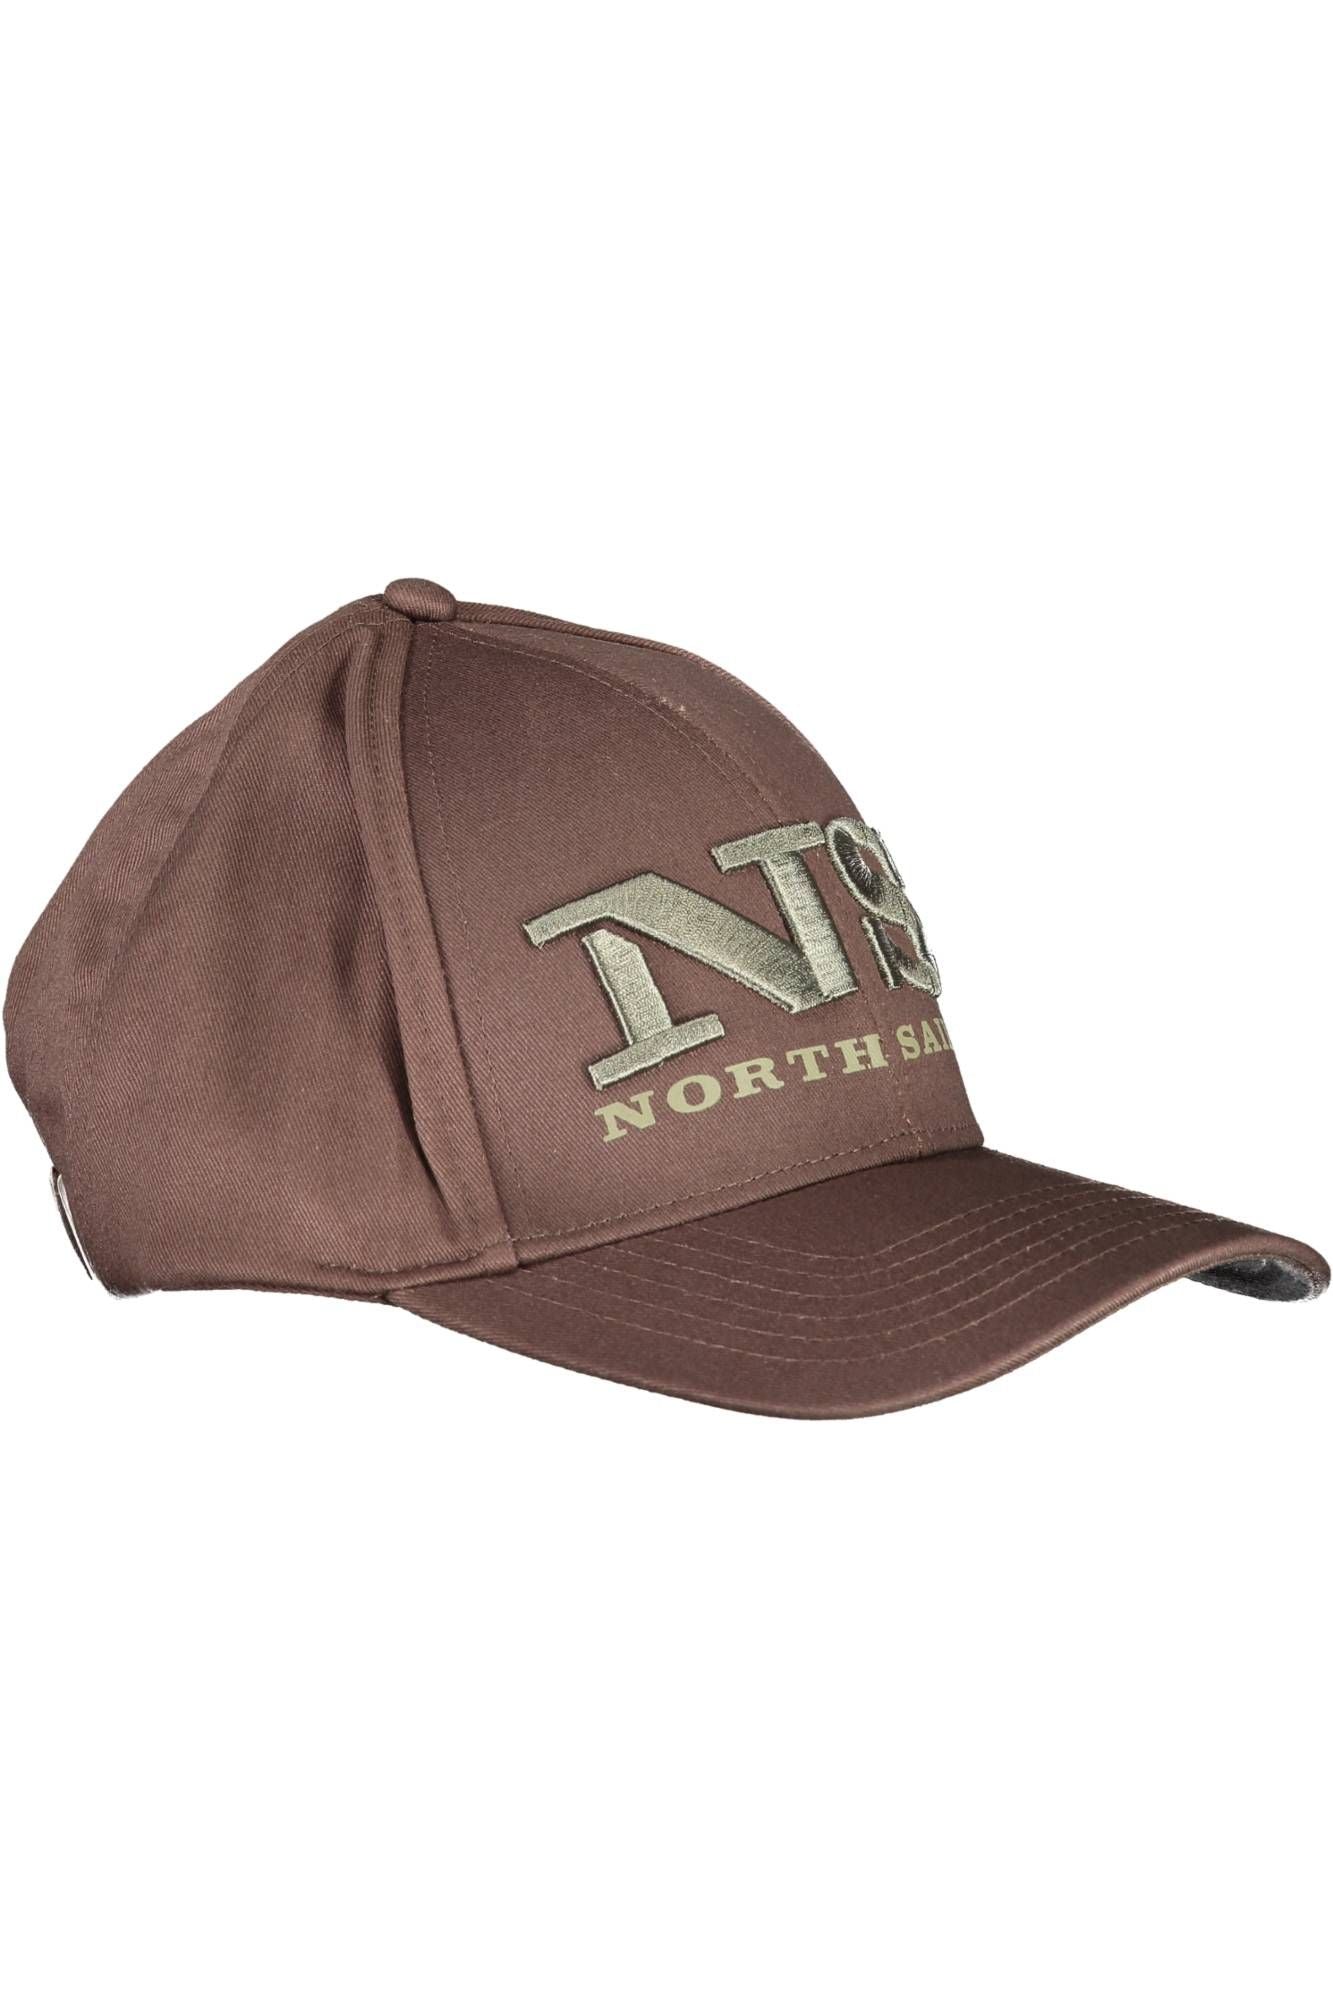 North Sails Chic Embroidered Cotton Cap with Visor